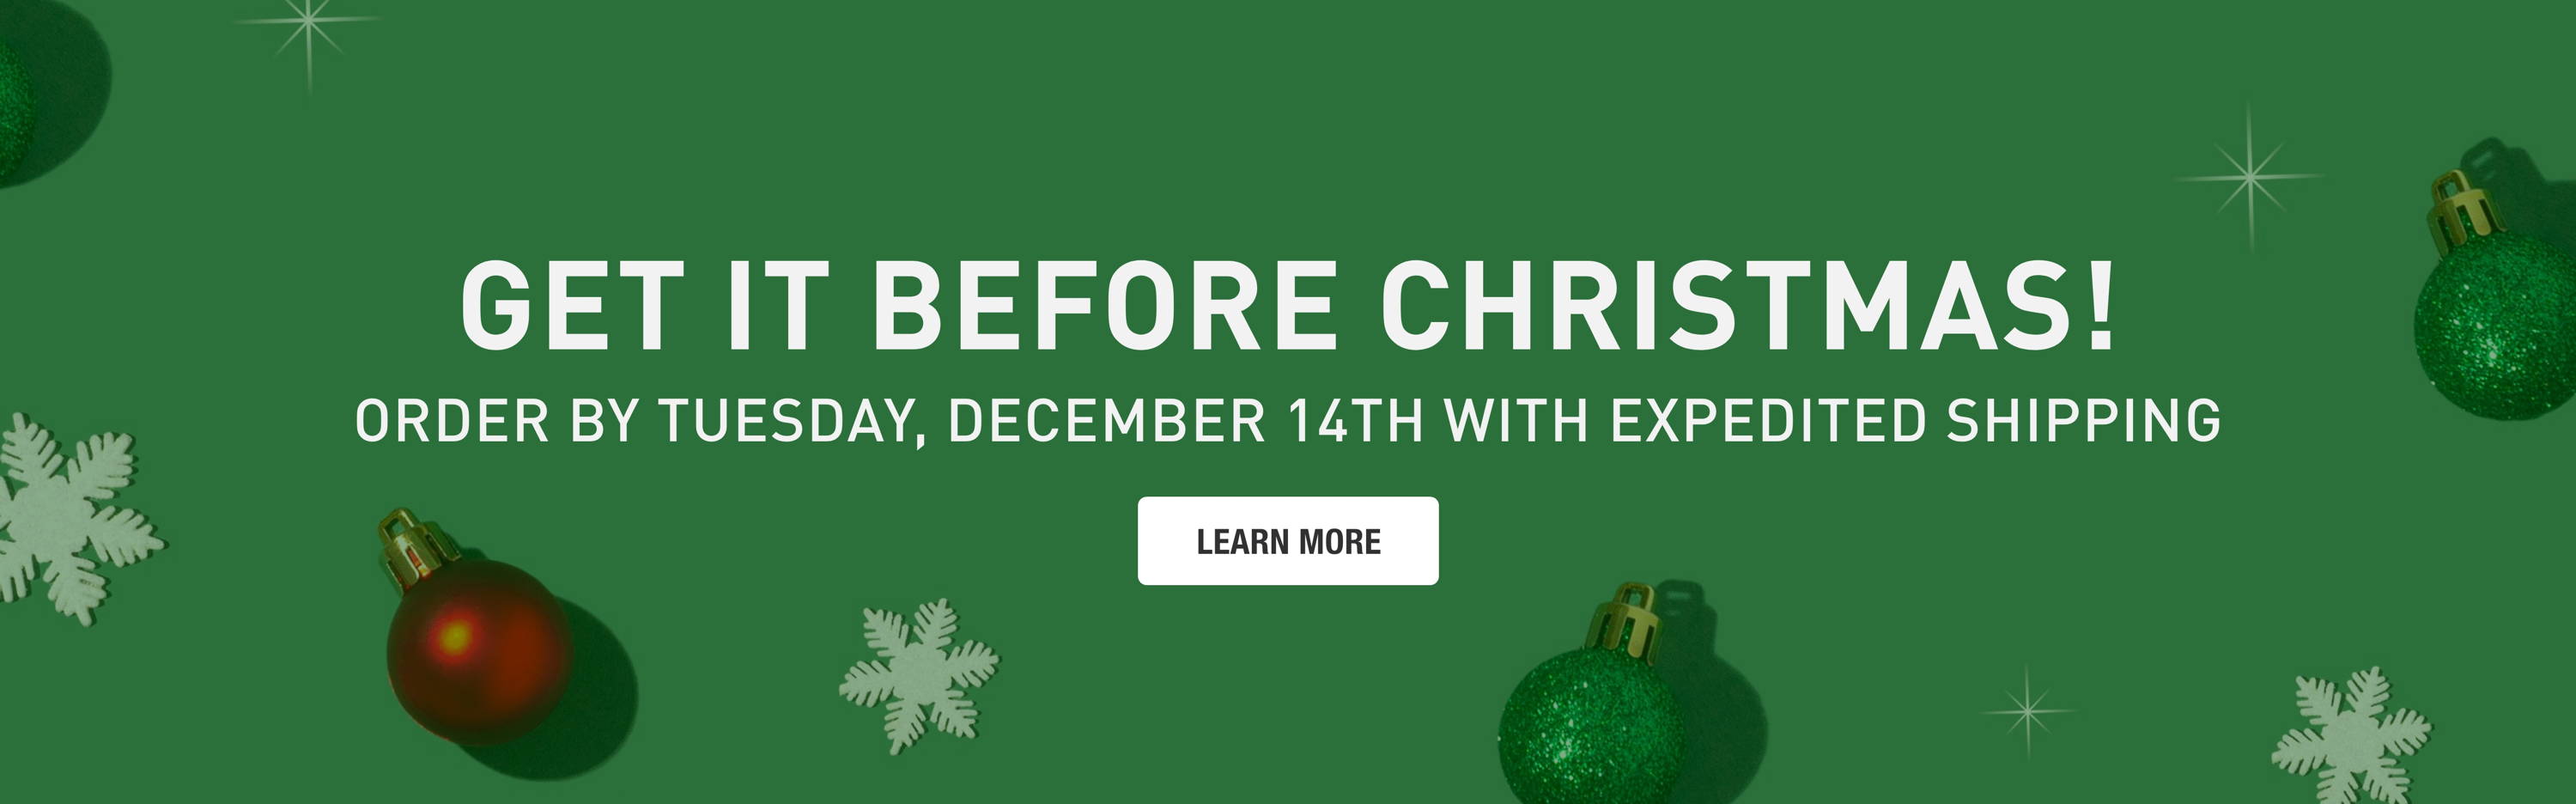 Get it before Christmas! Order by Tuesday, December 14th with Expedited Shipping. Learn More